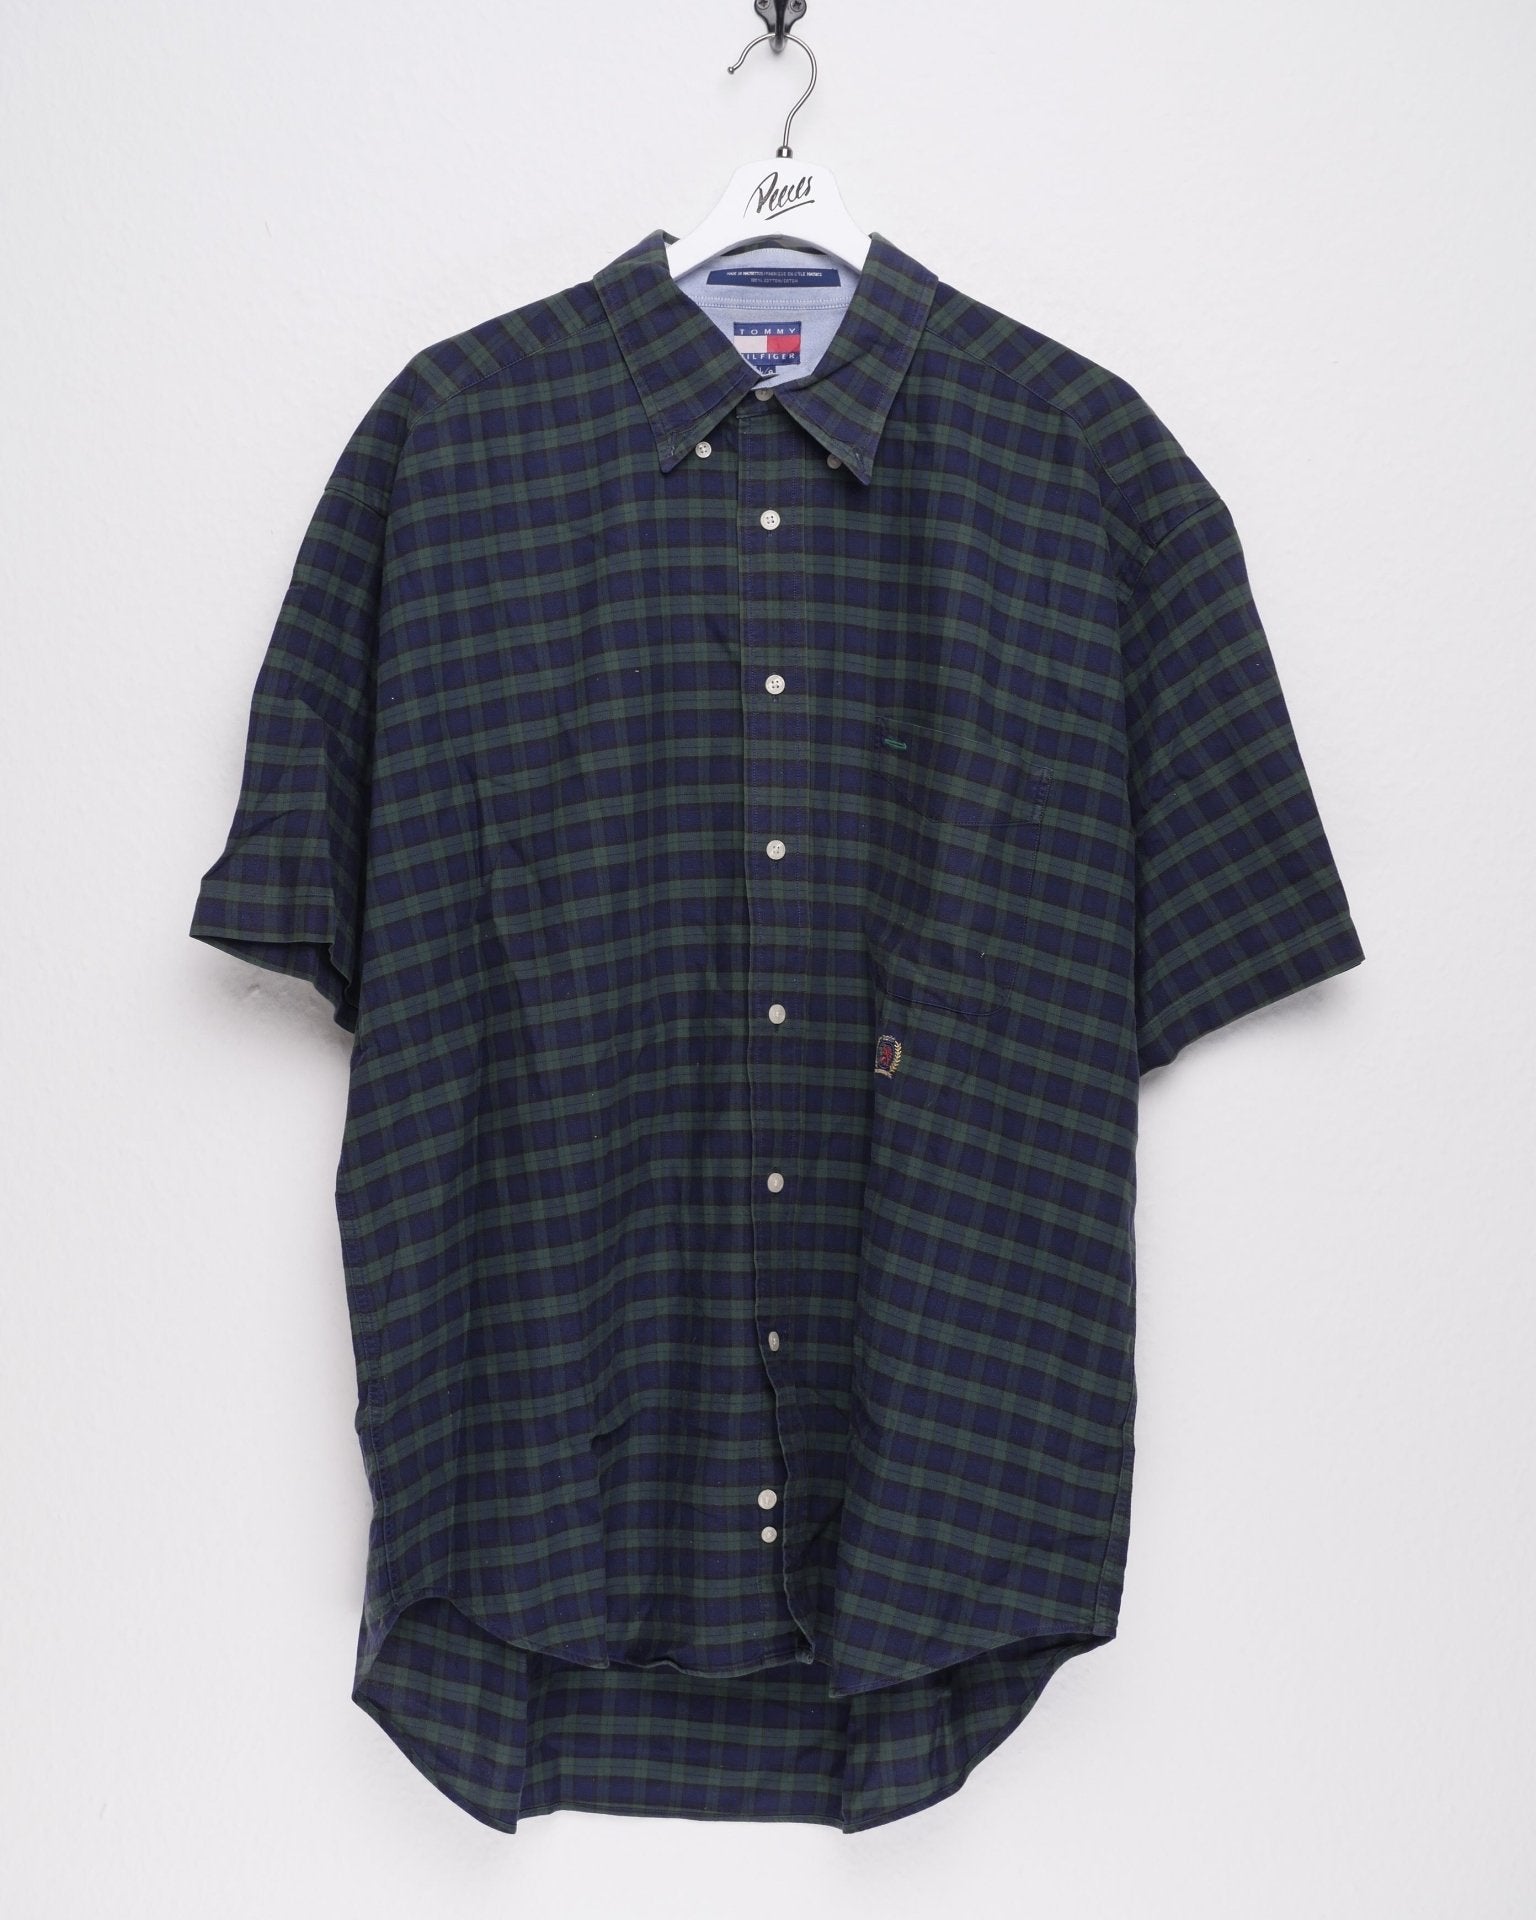 tommy Hilfiger checkered pattern S/S Hemd - Peeces